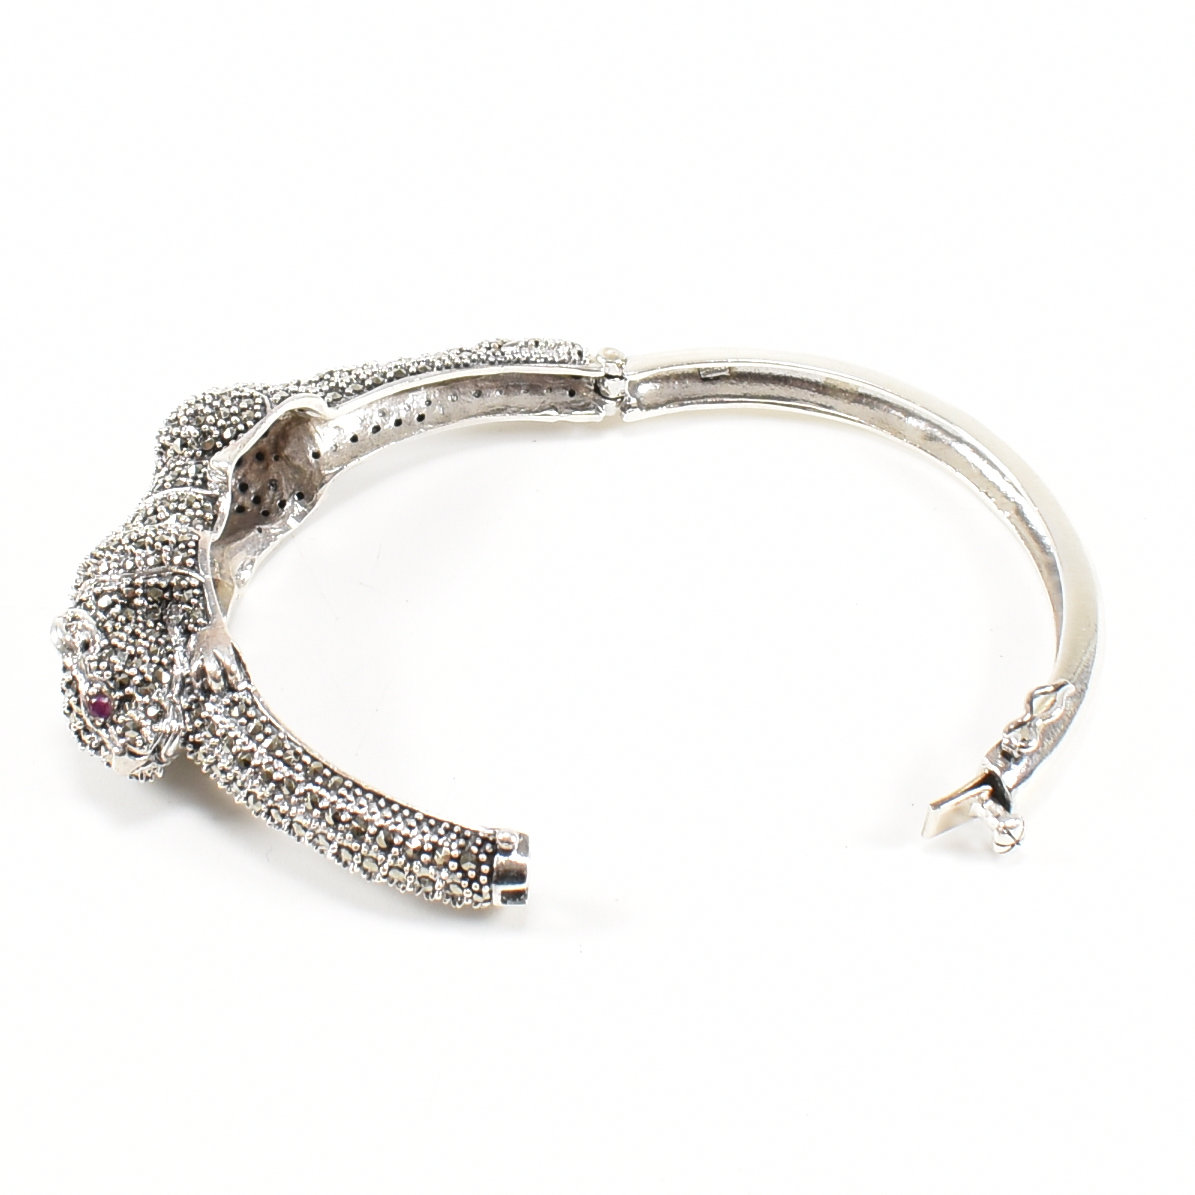 CONTEMPORARY SILVER & MARCASITE CAT HINGED BANGLE - Image 3 of 6